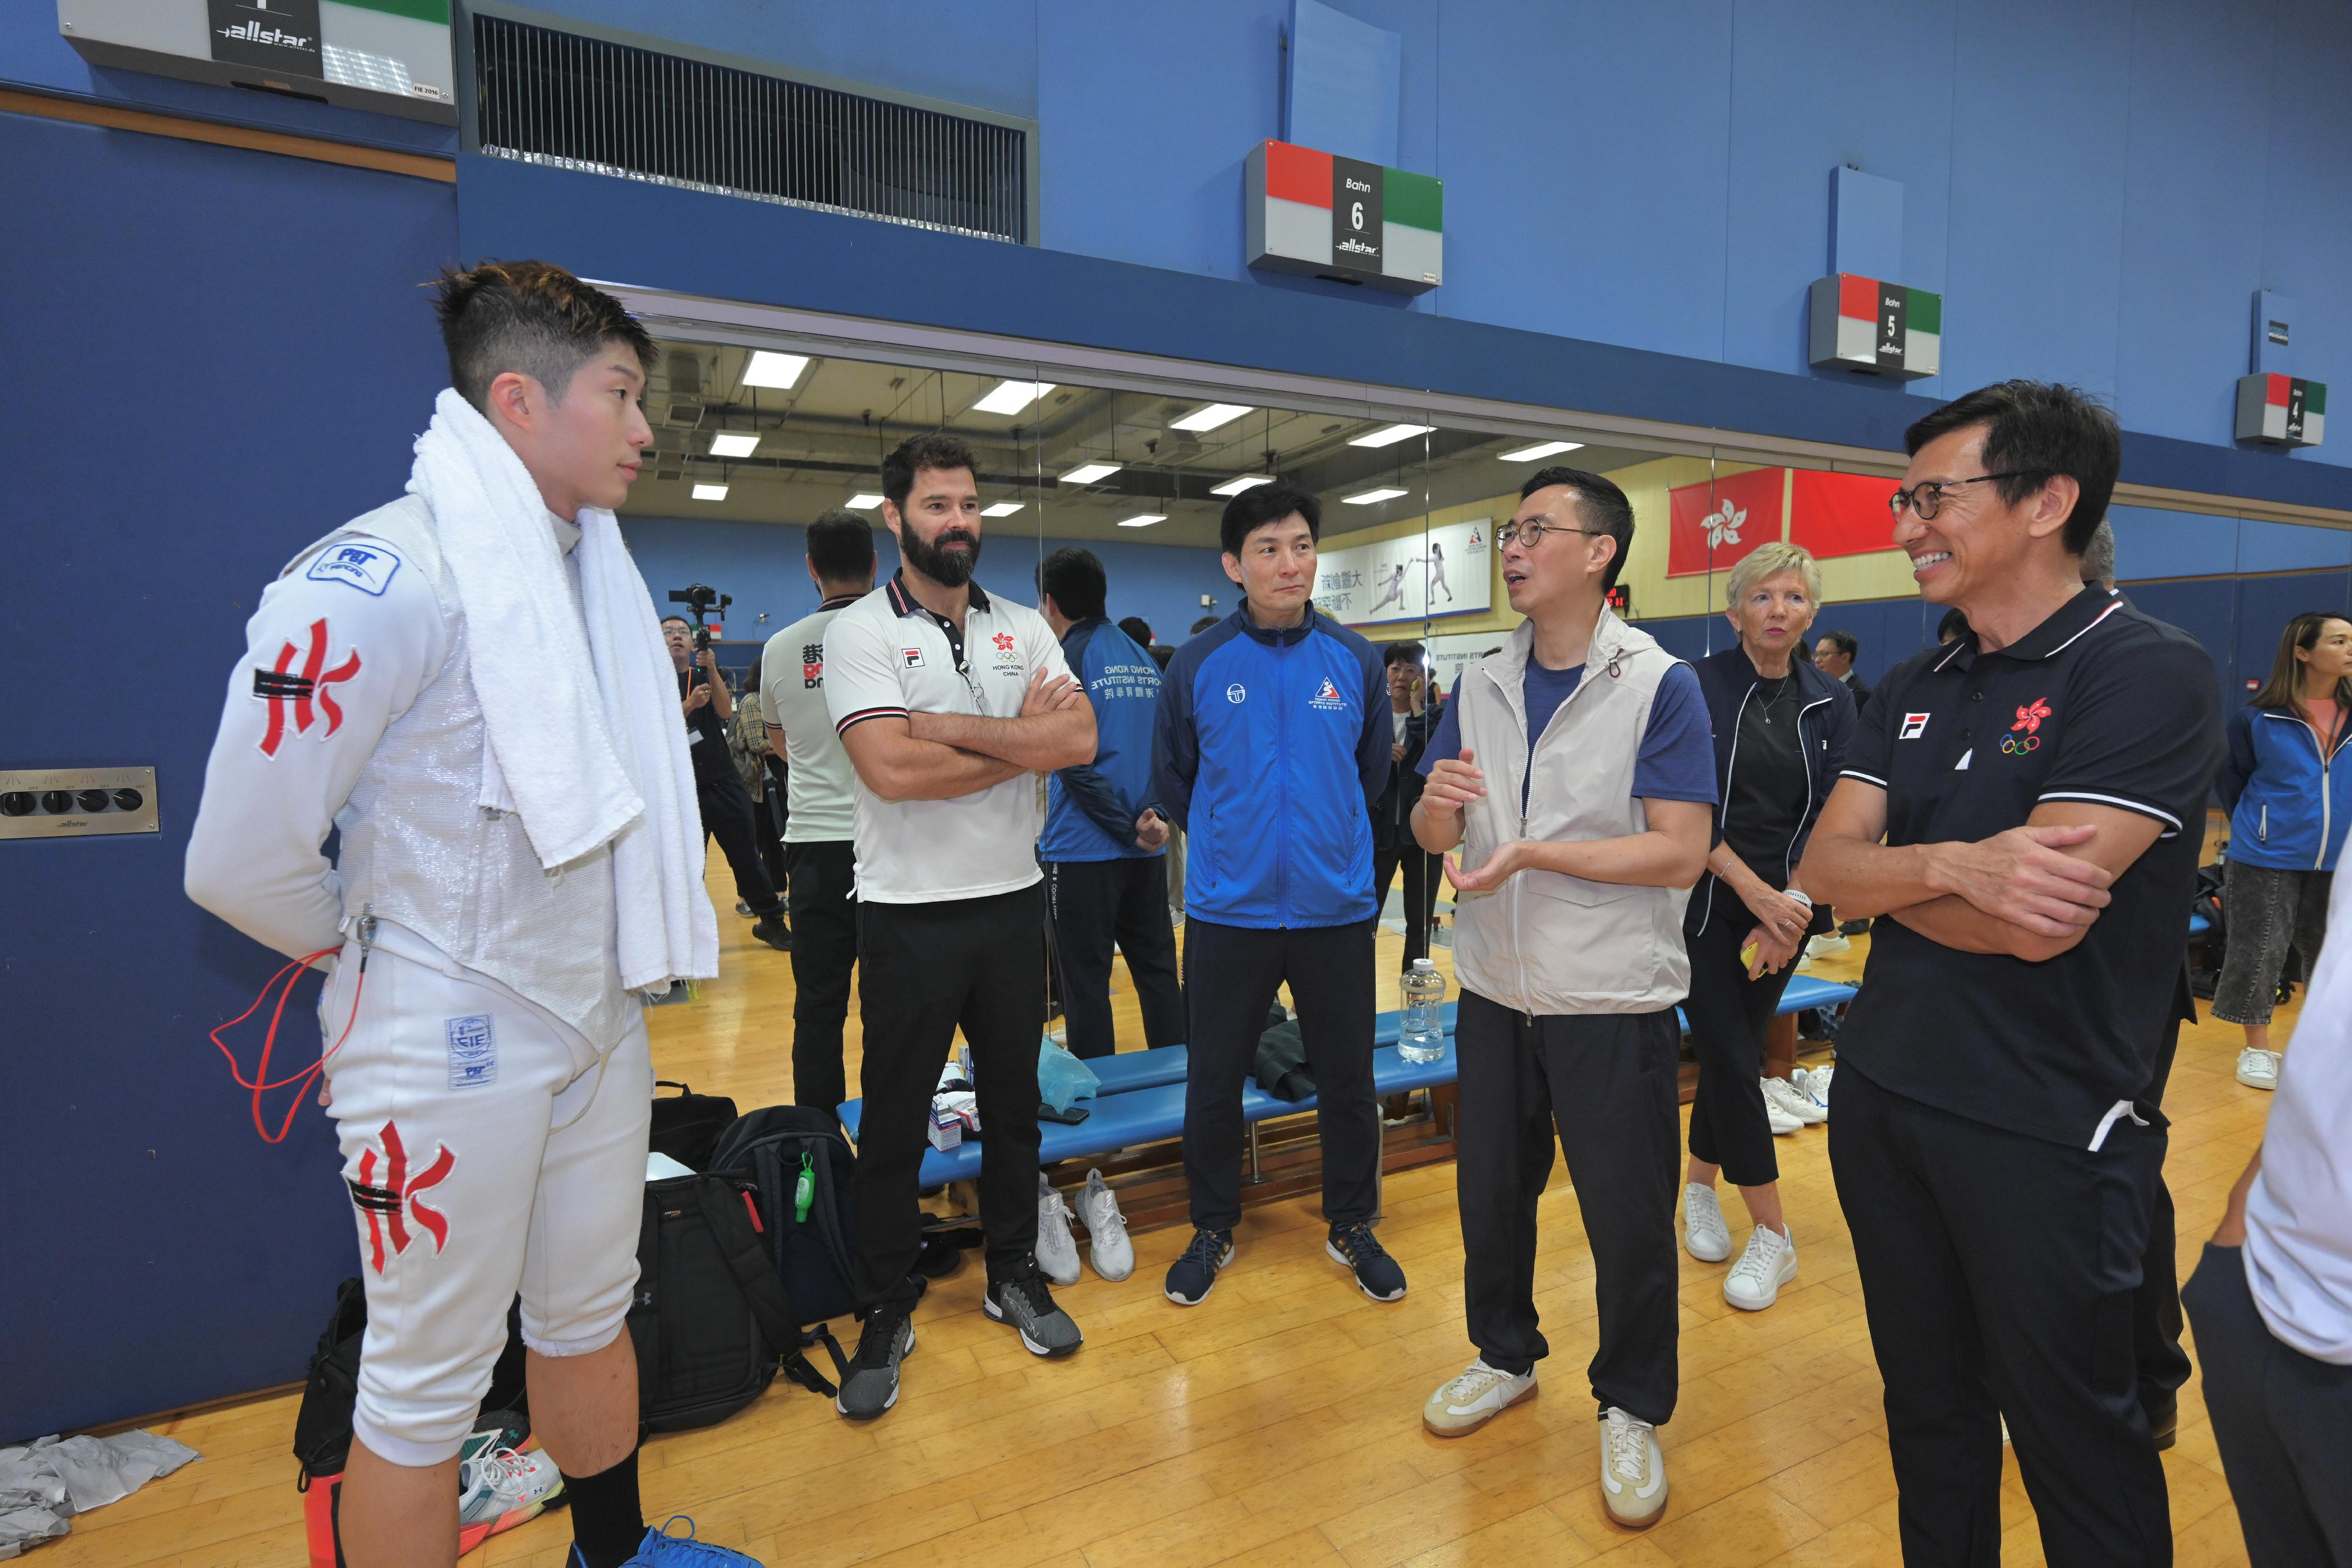 The Secretary for Culture, Sports and Tourism, Mr Kevin Yeung (second right), and the Commissioner for Sports, Mr Sam Wong (first right), this morning (September 14) visited the fencing hall in the Hong Kong Sports Institute to exchange with the fencer Cheung Ka-long (first left) and coaches.
